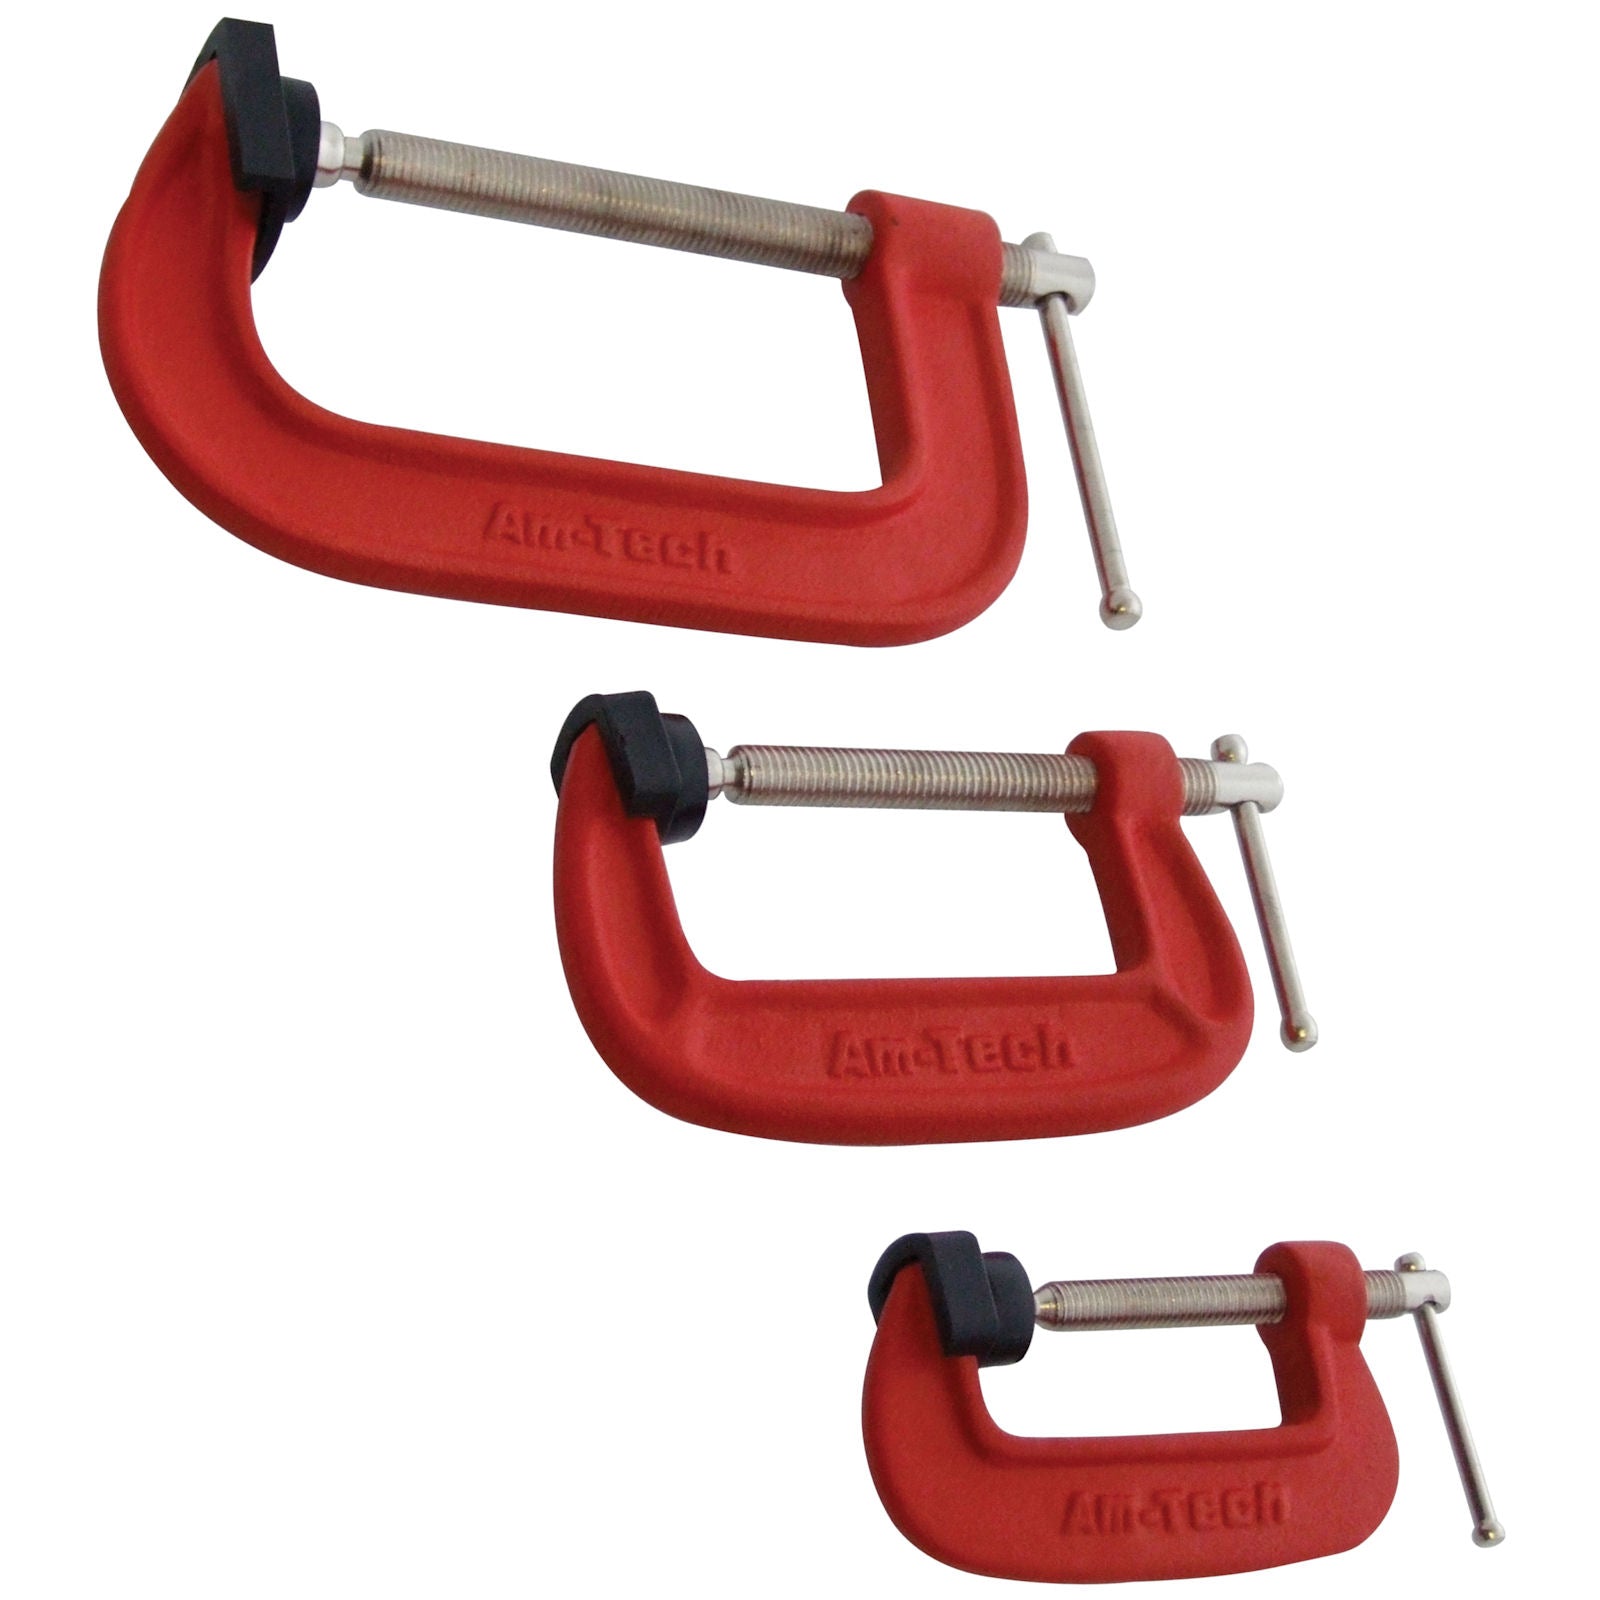 Amtech 3 Piece G-Clamp Set with Soft Jaw Pads